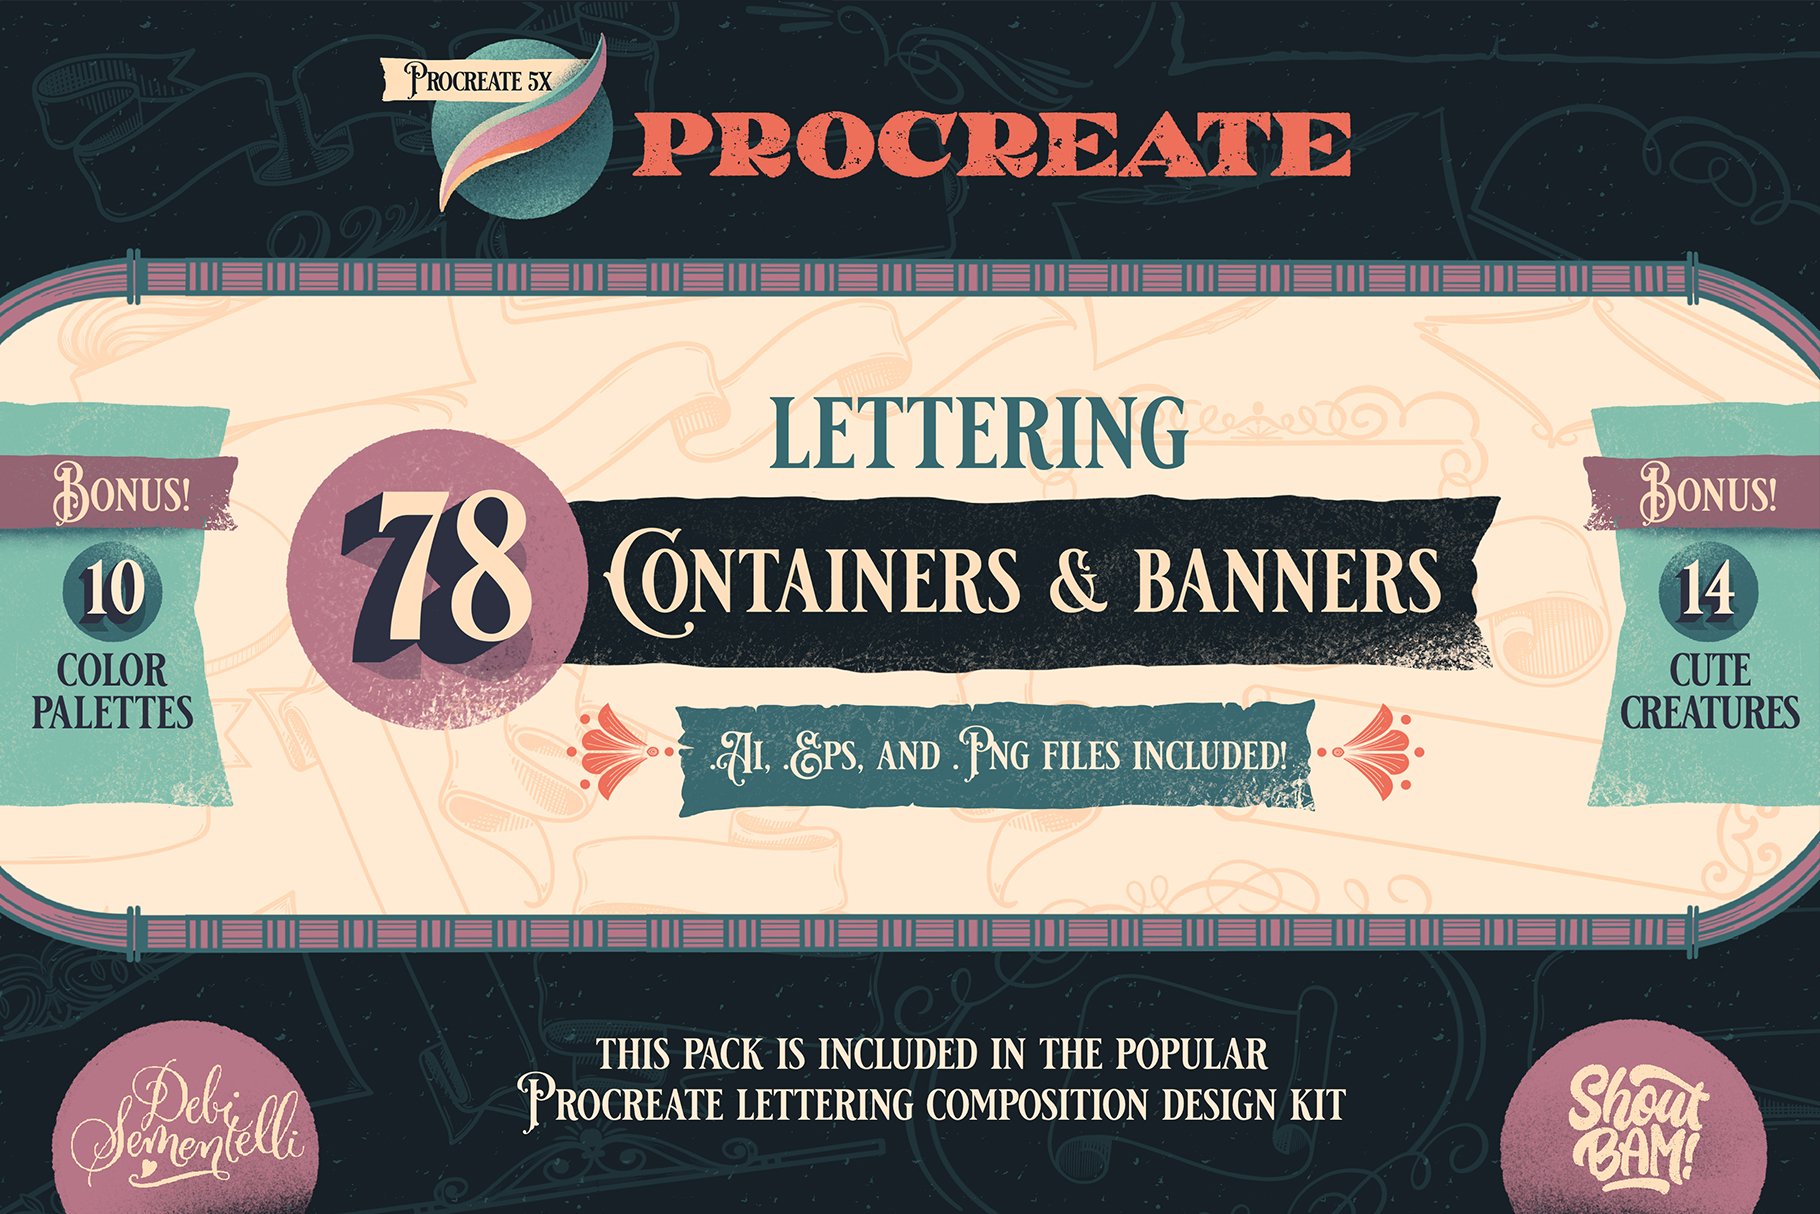 Procreate Banners & Containerscover image.